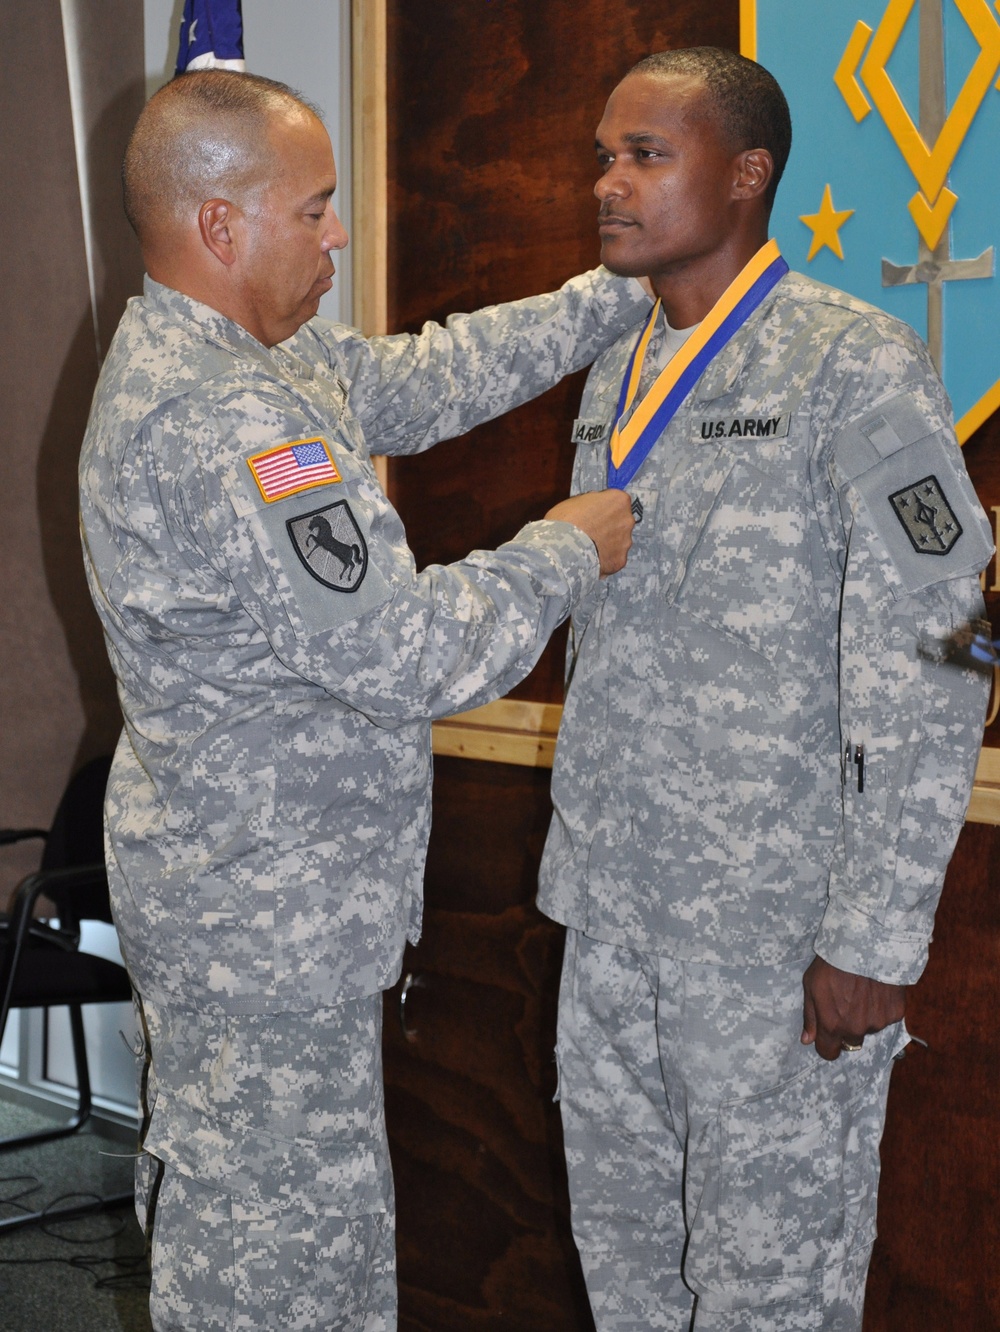 Soldiers Receives Honorable Order of the Dragon Medal